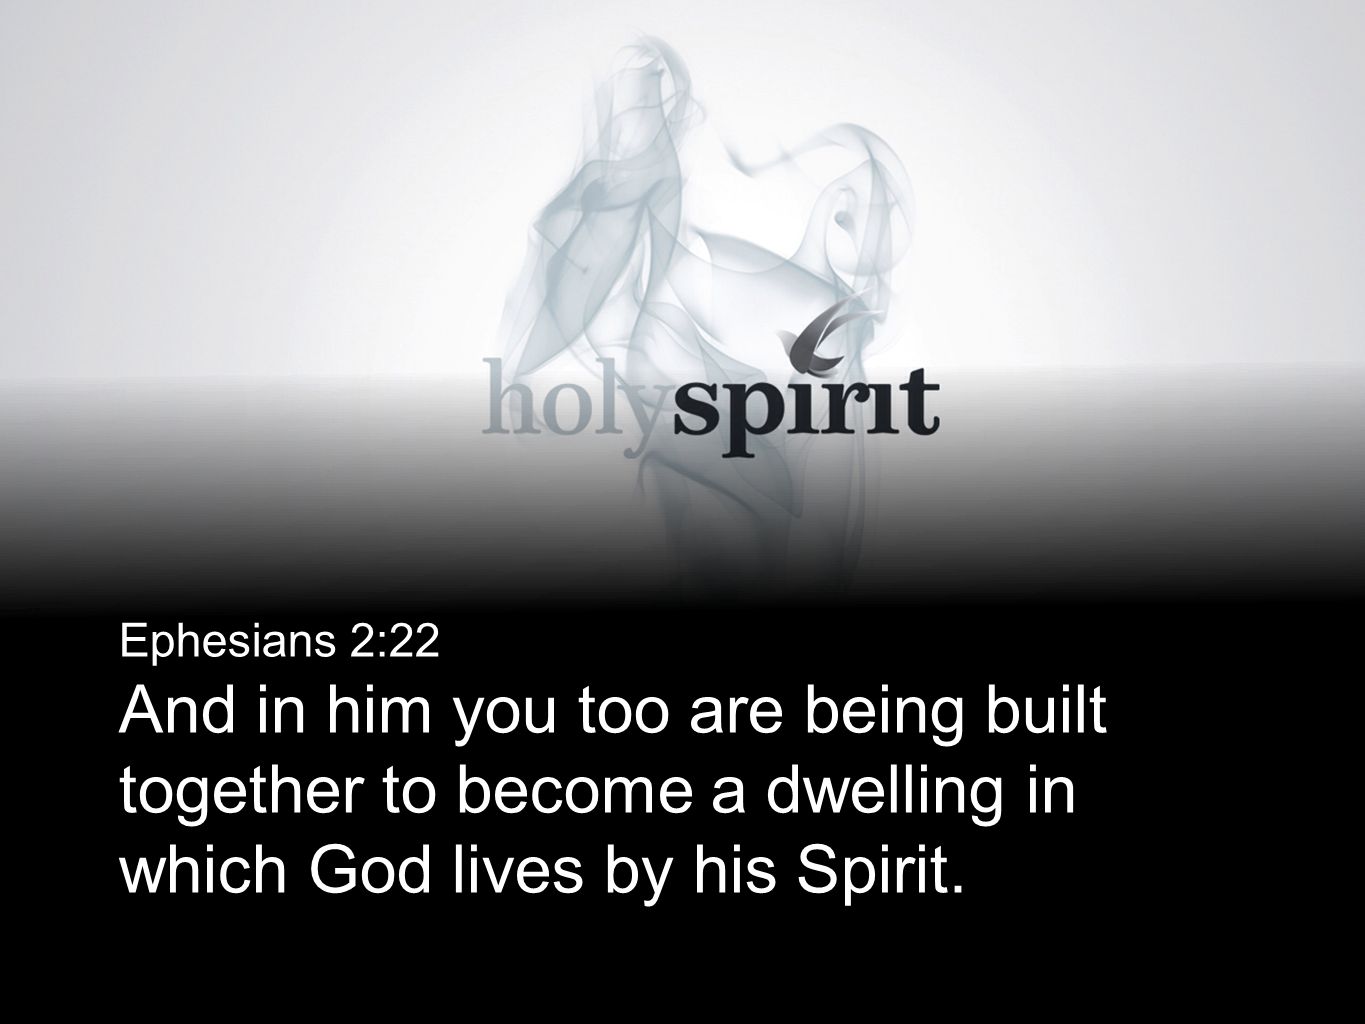 Ephesians 2:22 And in him you too are being built together to become a dwelling in which God lives by his Spirit.